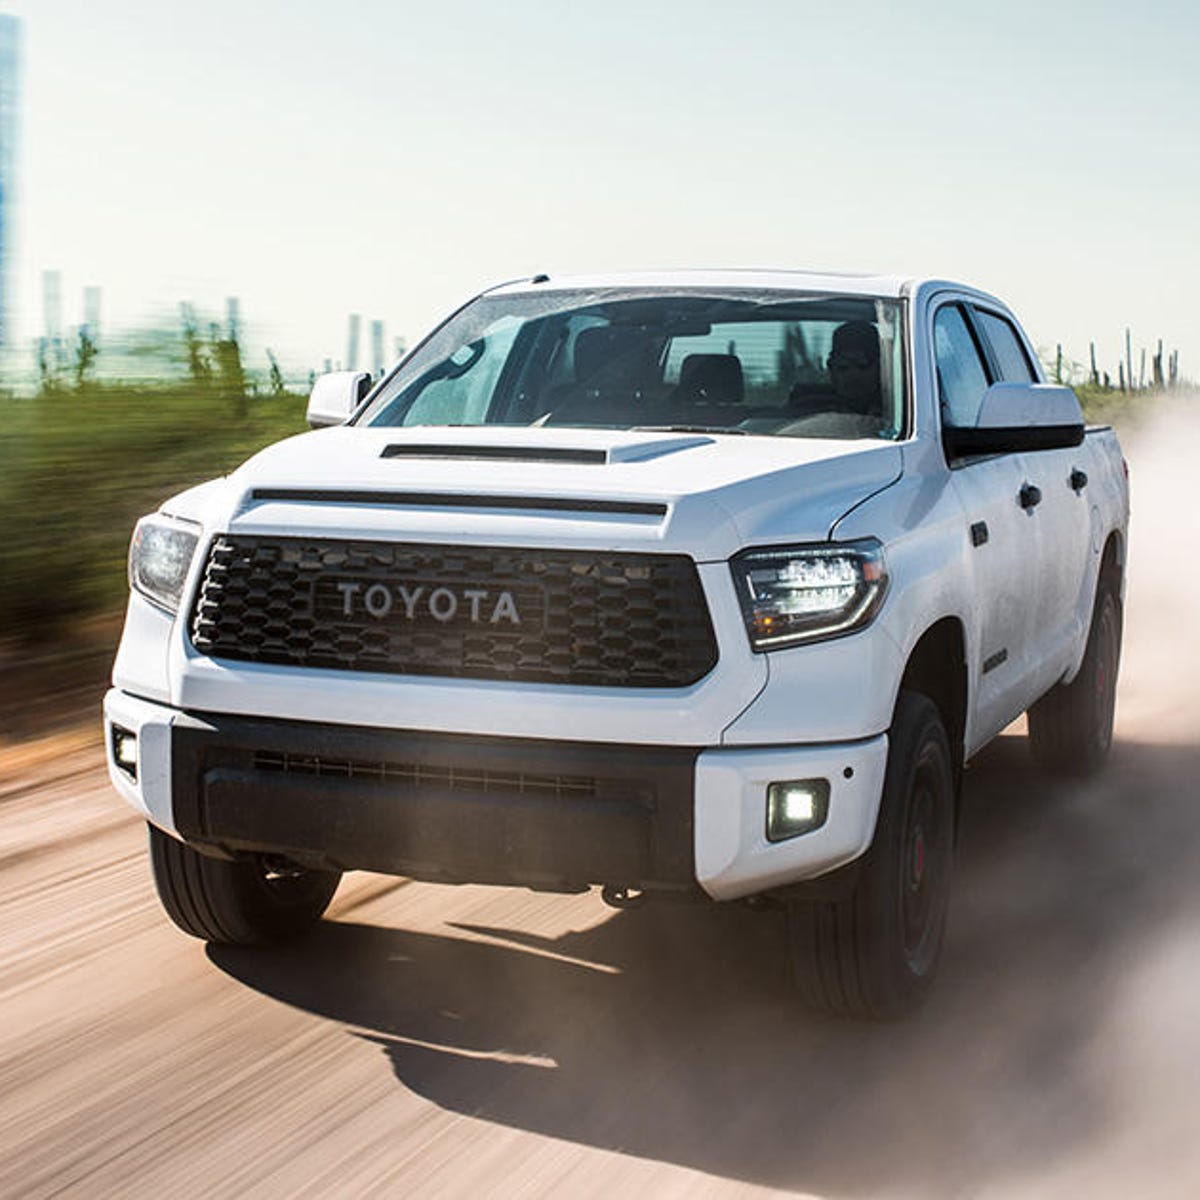 2019 Toyota Tundra review: 2019 Toyota Tundra: Model overview, pricing,  tech and specs - CNET